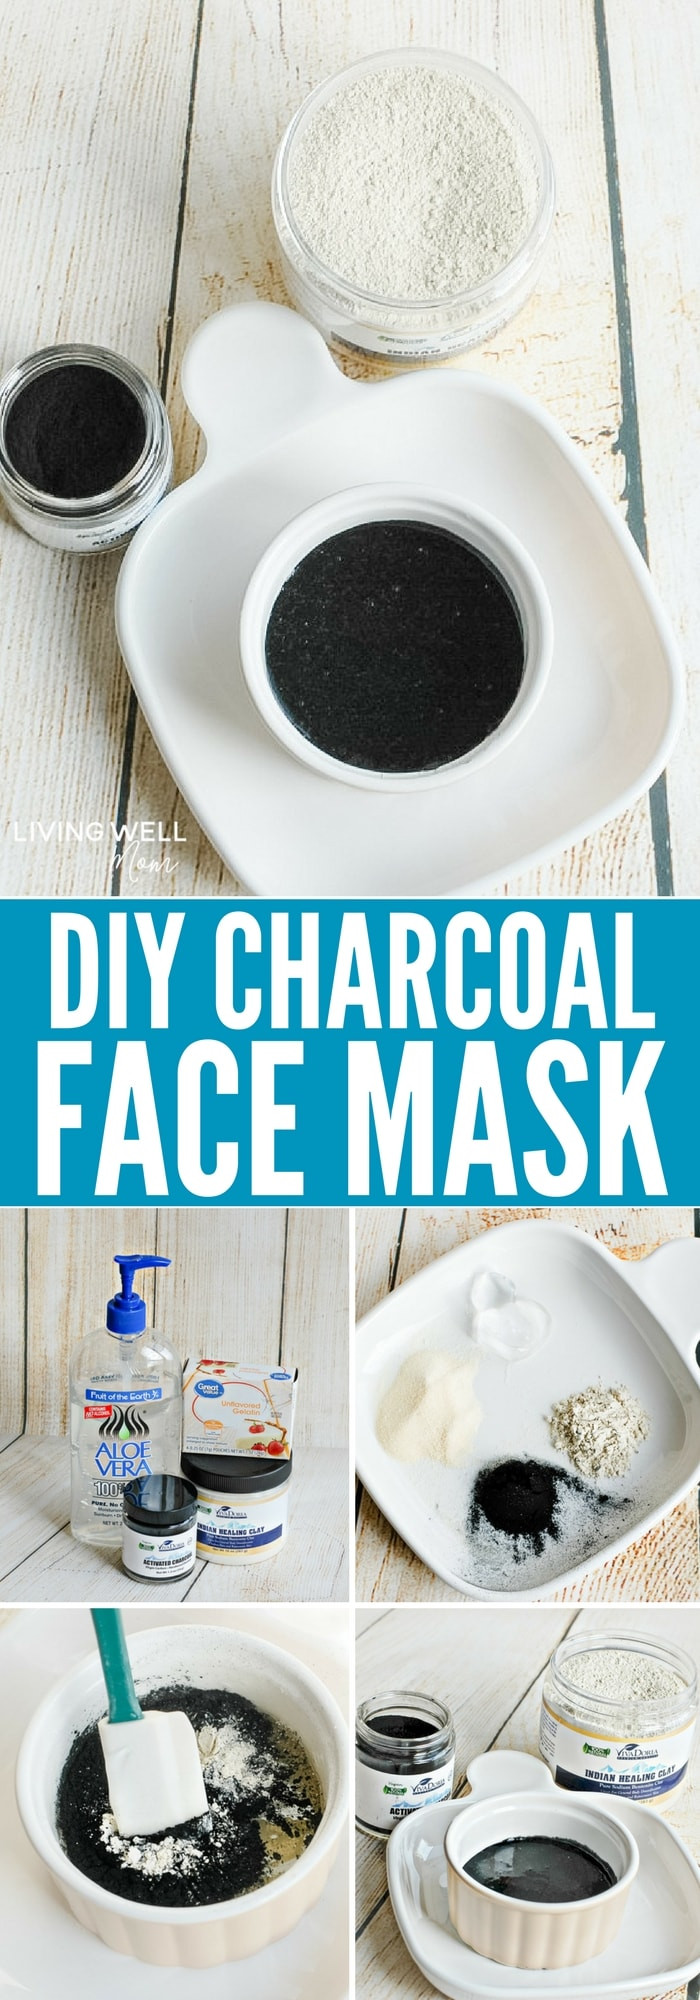 DIY Charcoal Mask
 DIY Charcoal Face Mask Recipe Living Well Mom